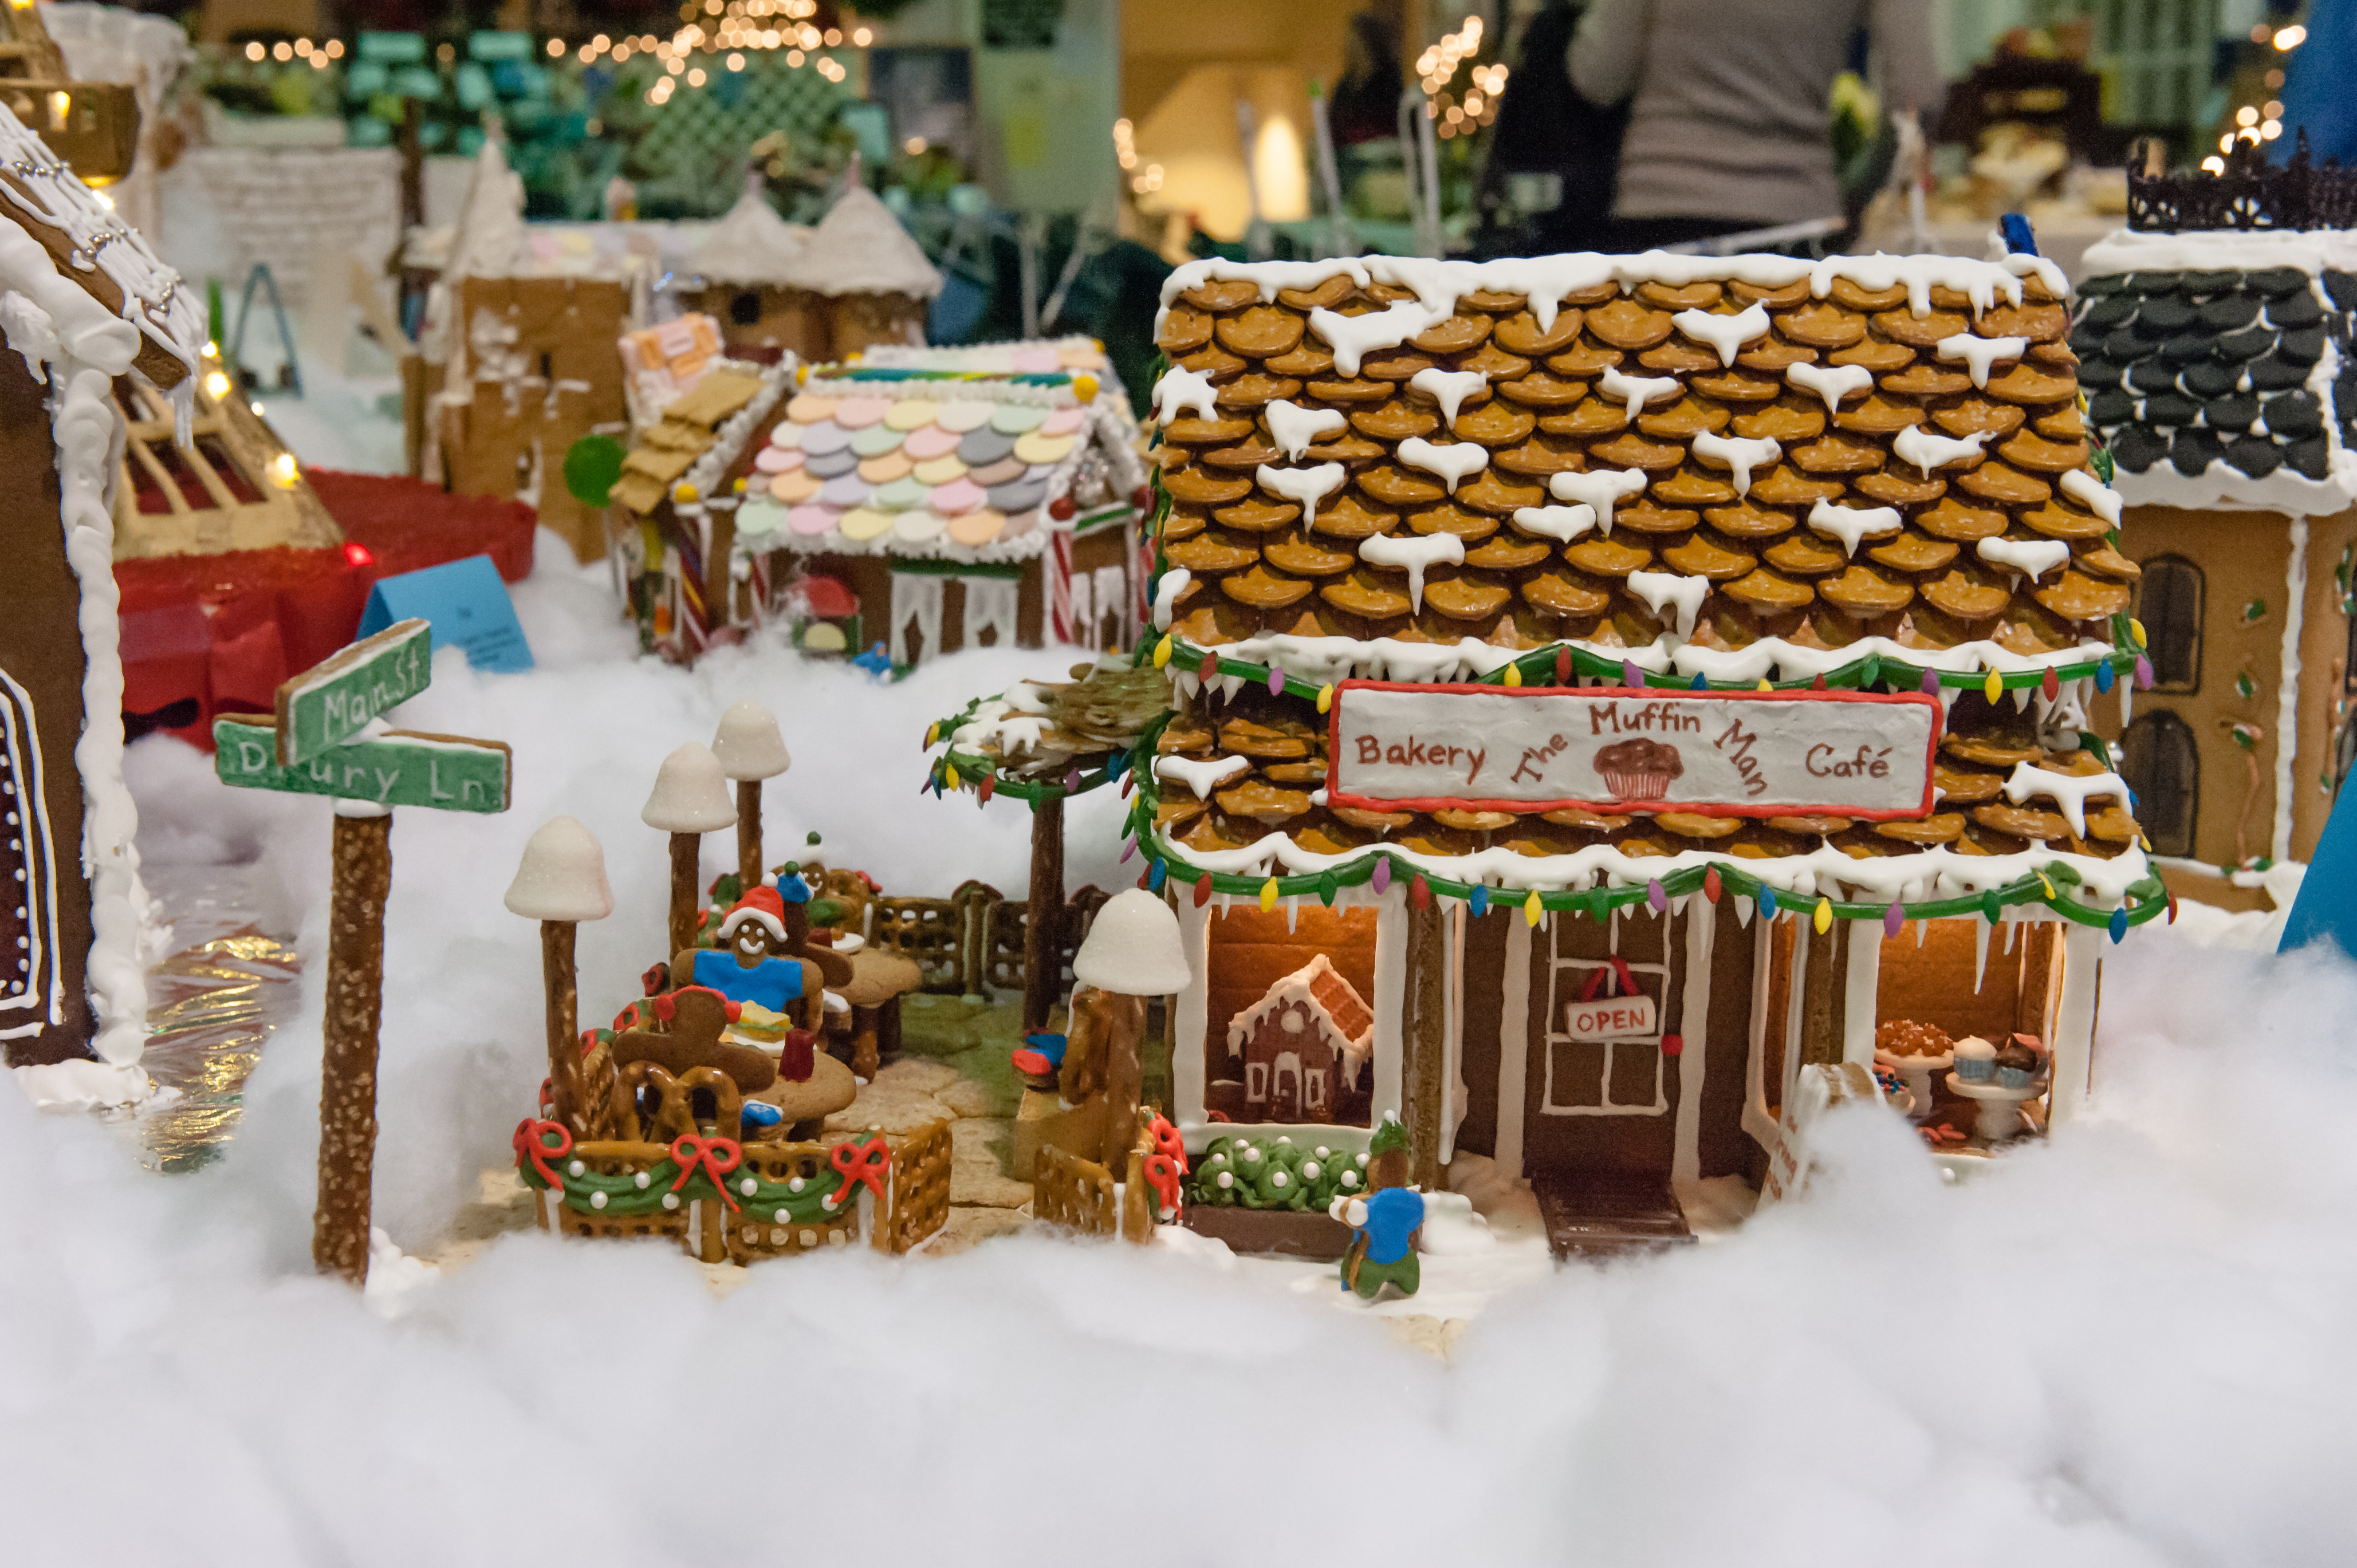 The Family Place’s 14th Annual Gingerbread Festival